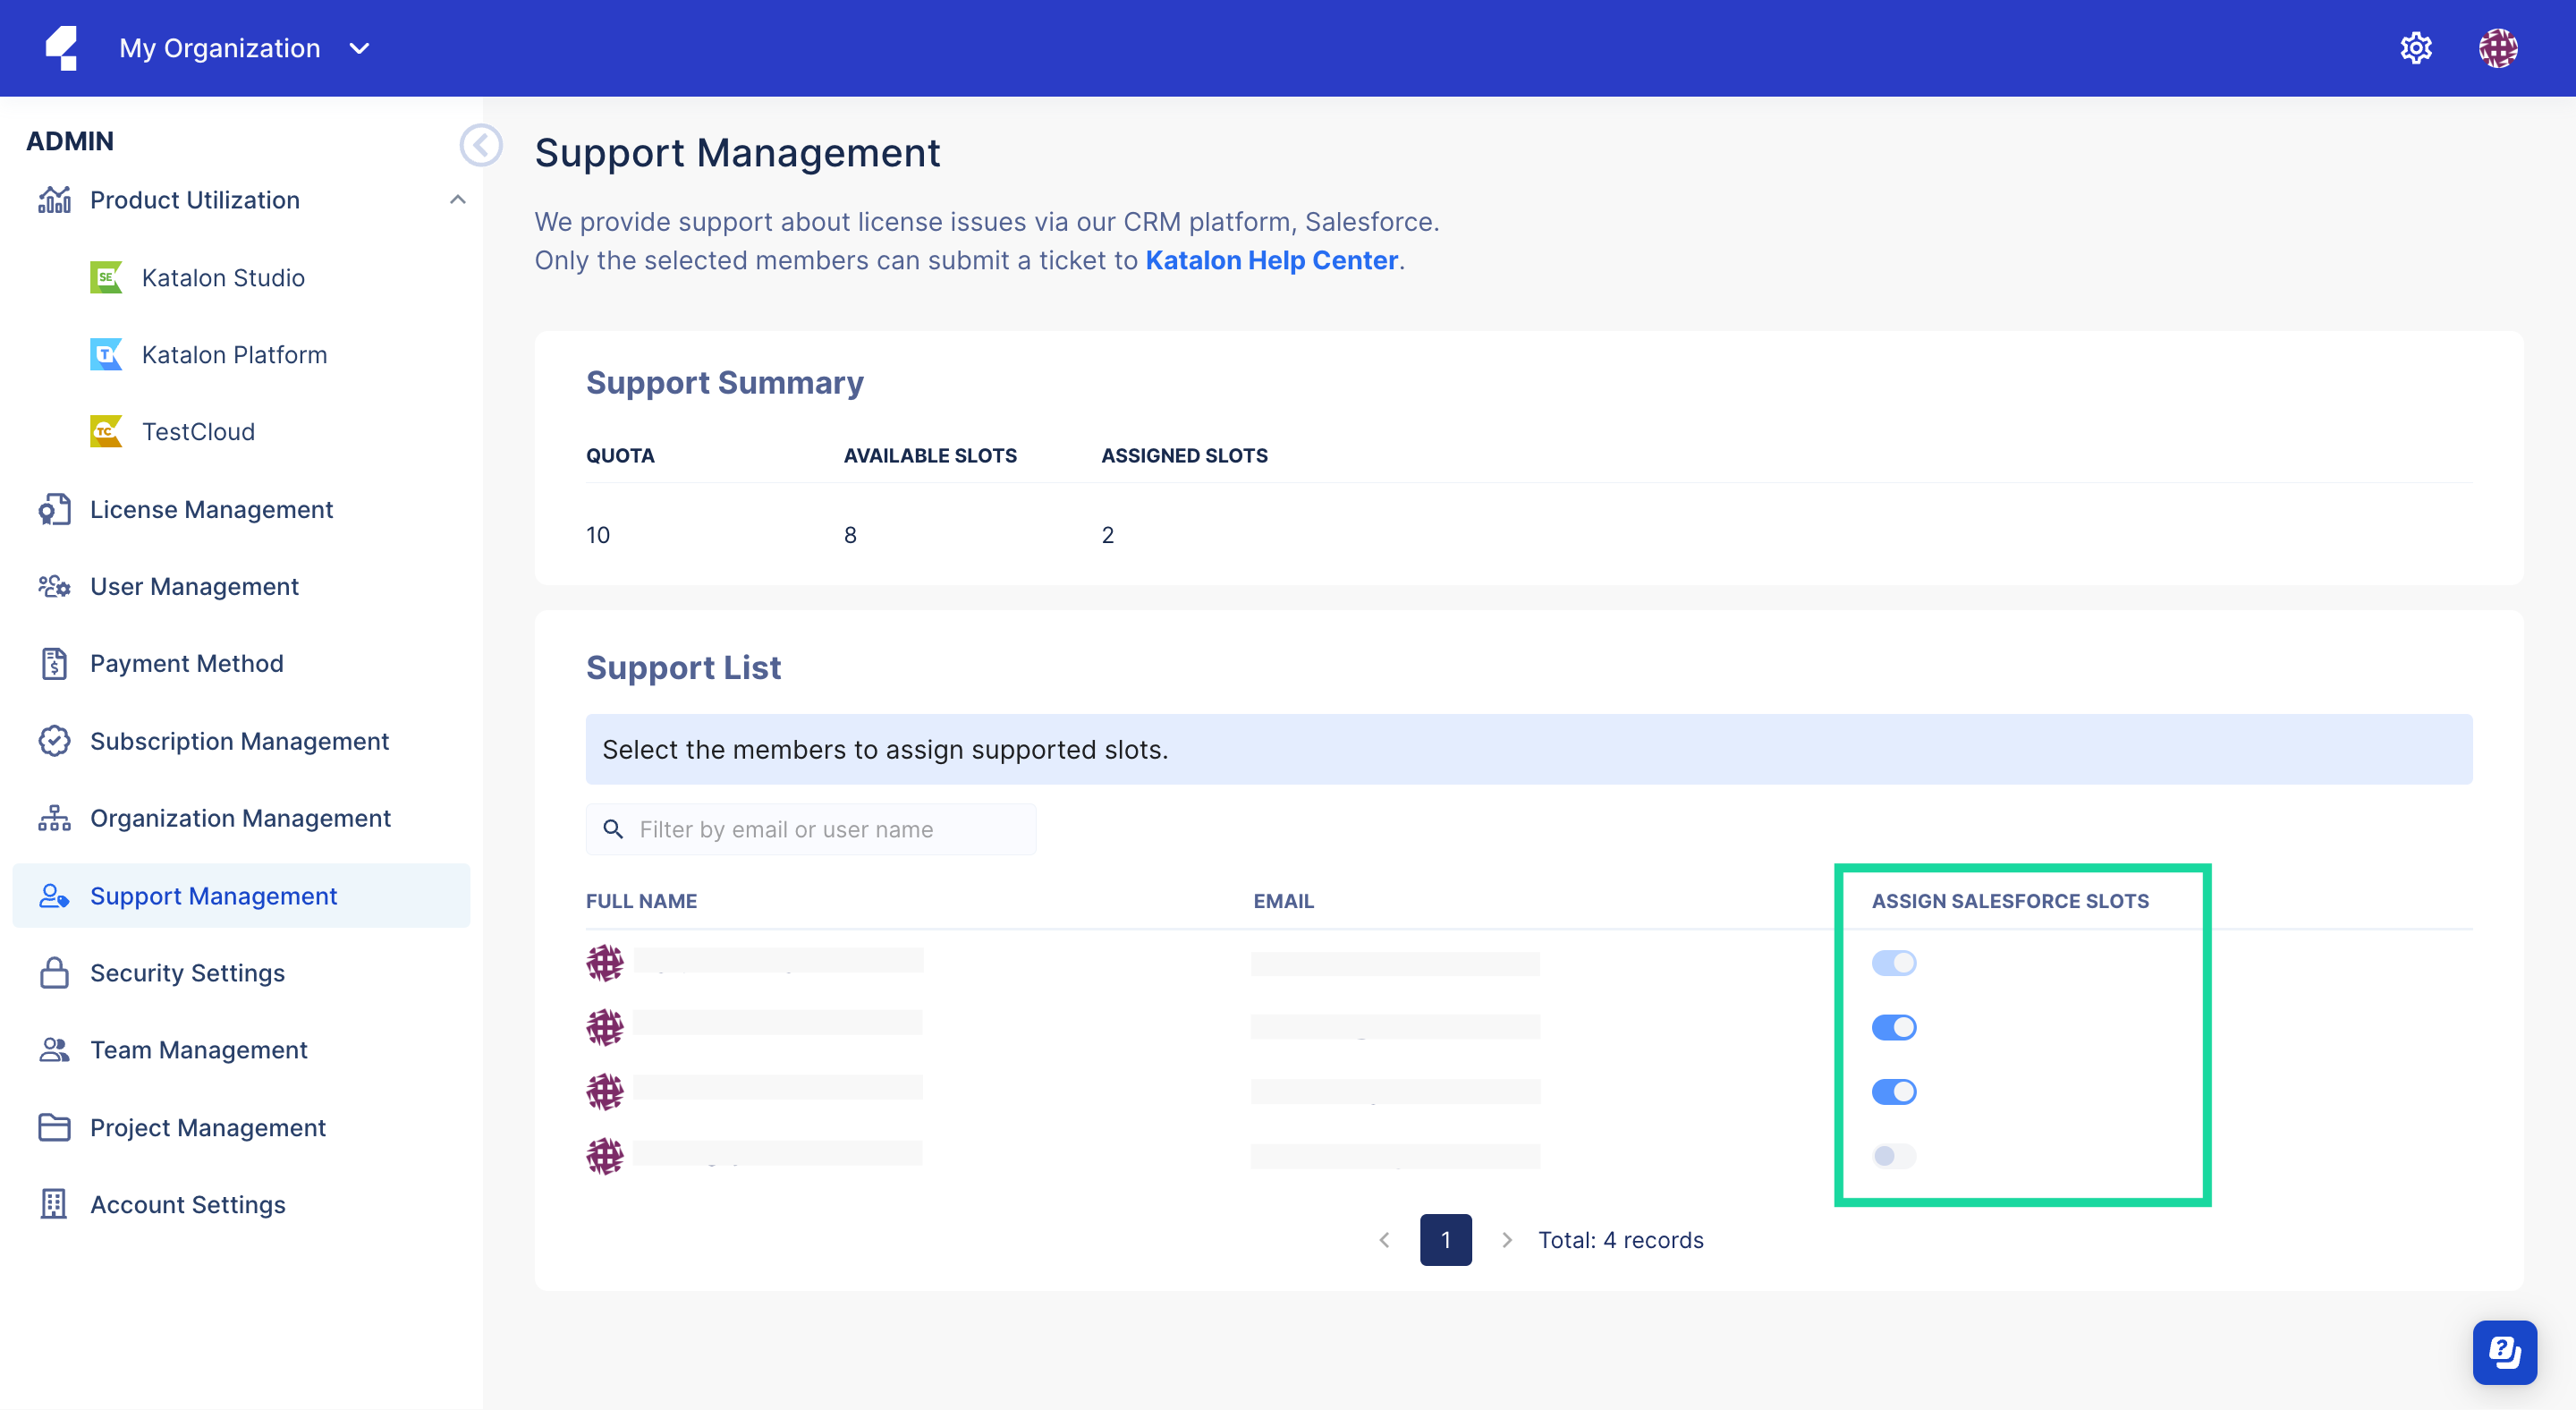 Support Management page